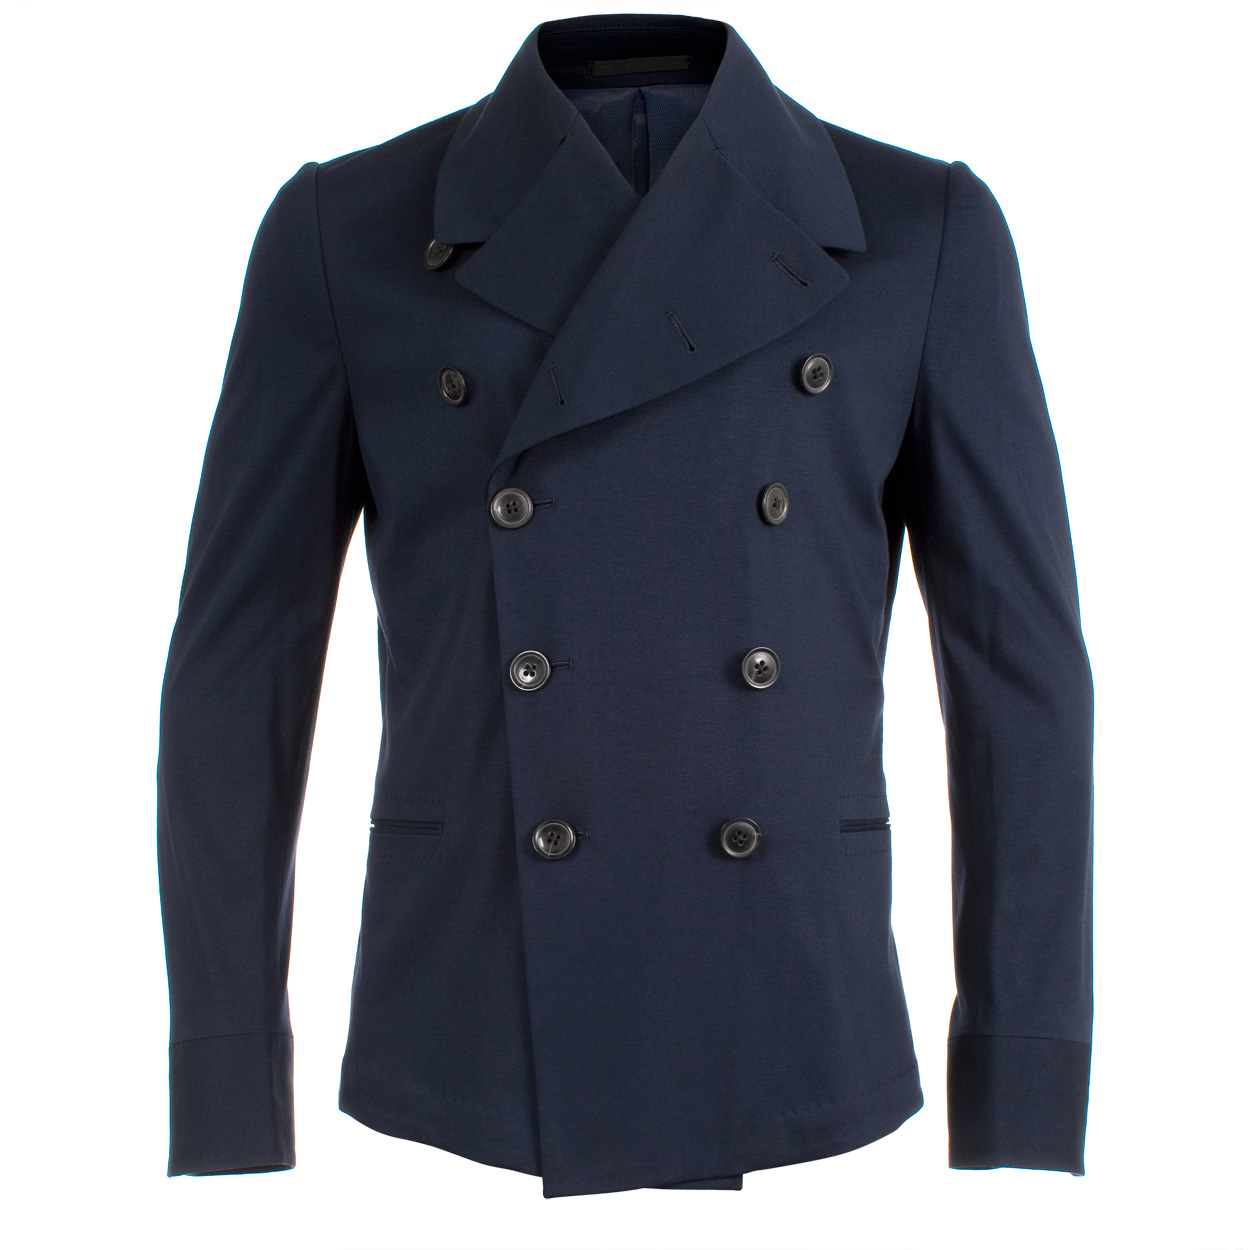 Tailors of Distinction: Paul Smith Double Breasted Navy Formal Jacket